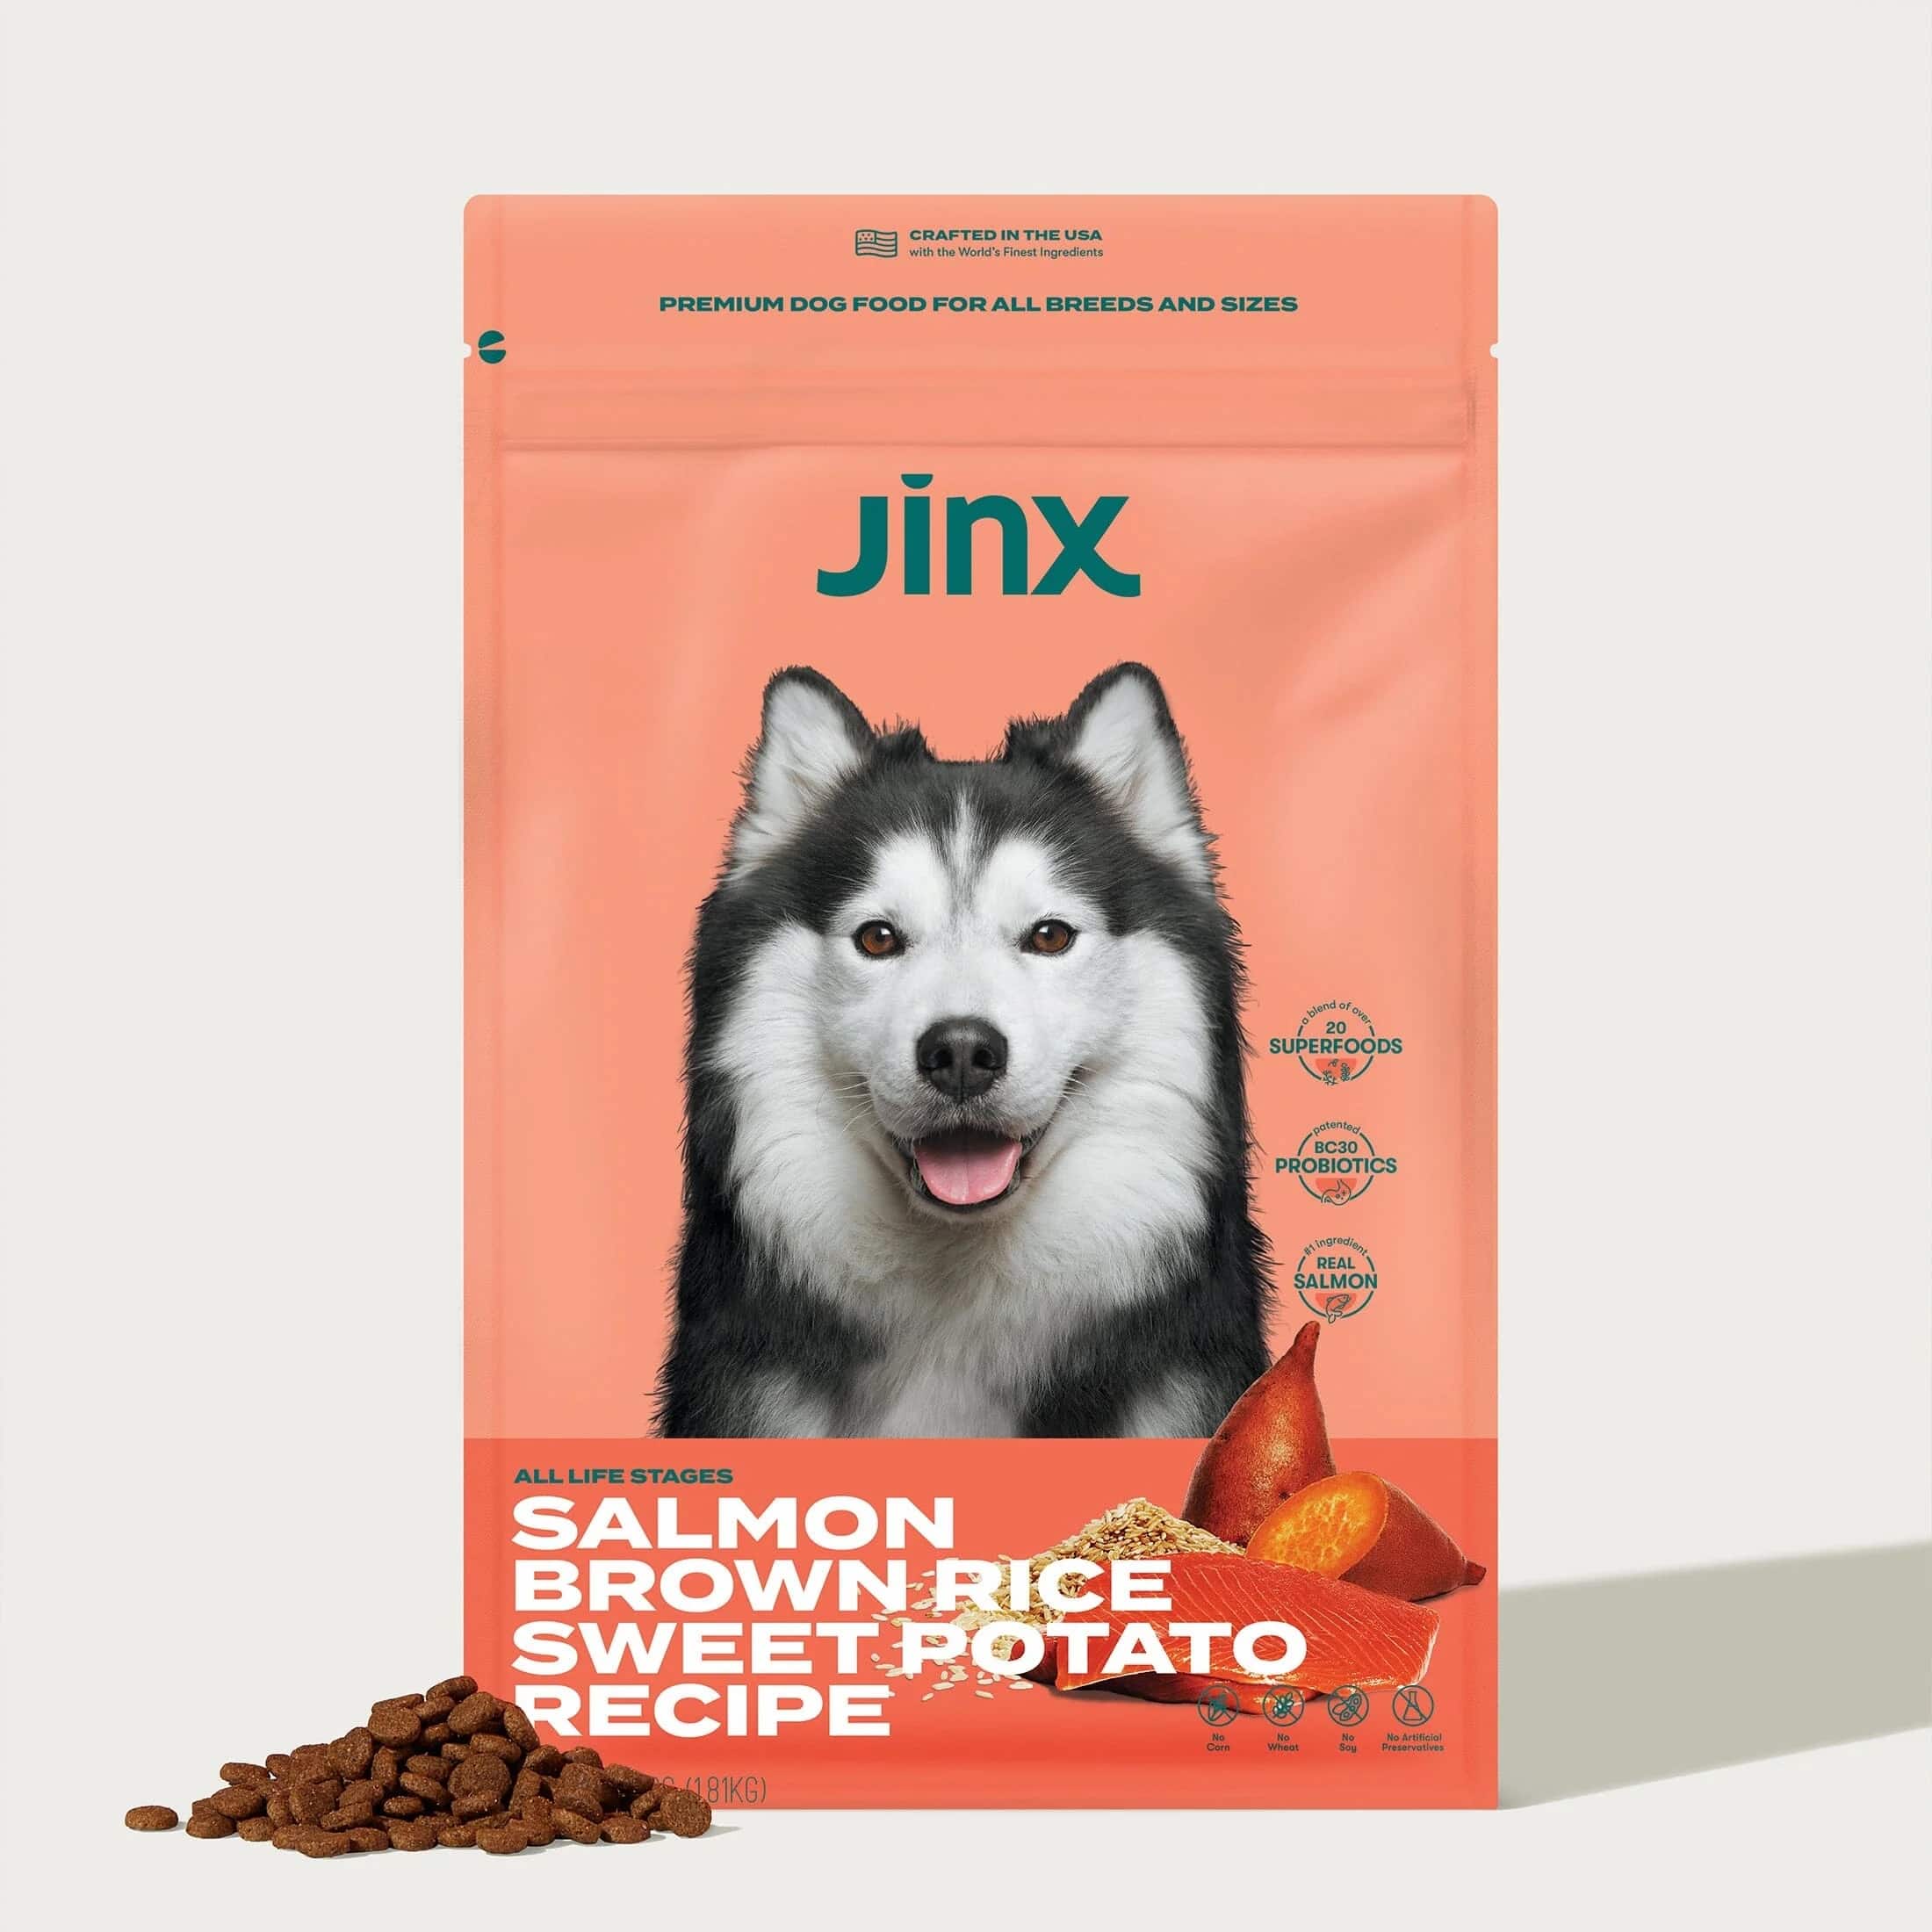 Package of Jinx salmon and brown rice recipe with sweet potato